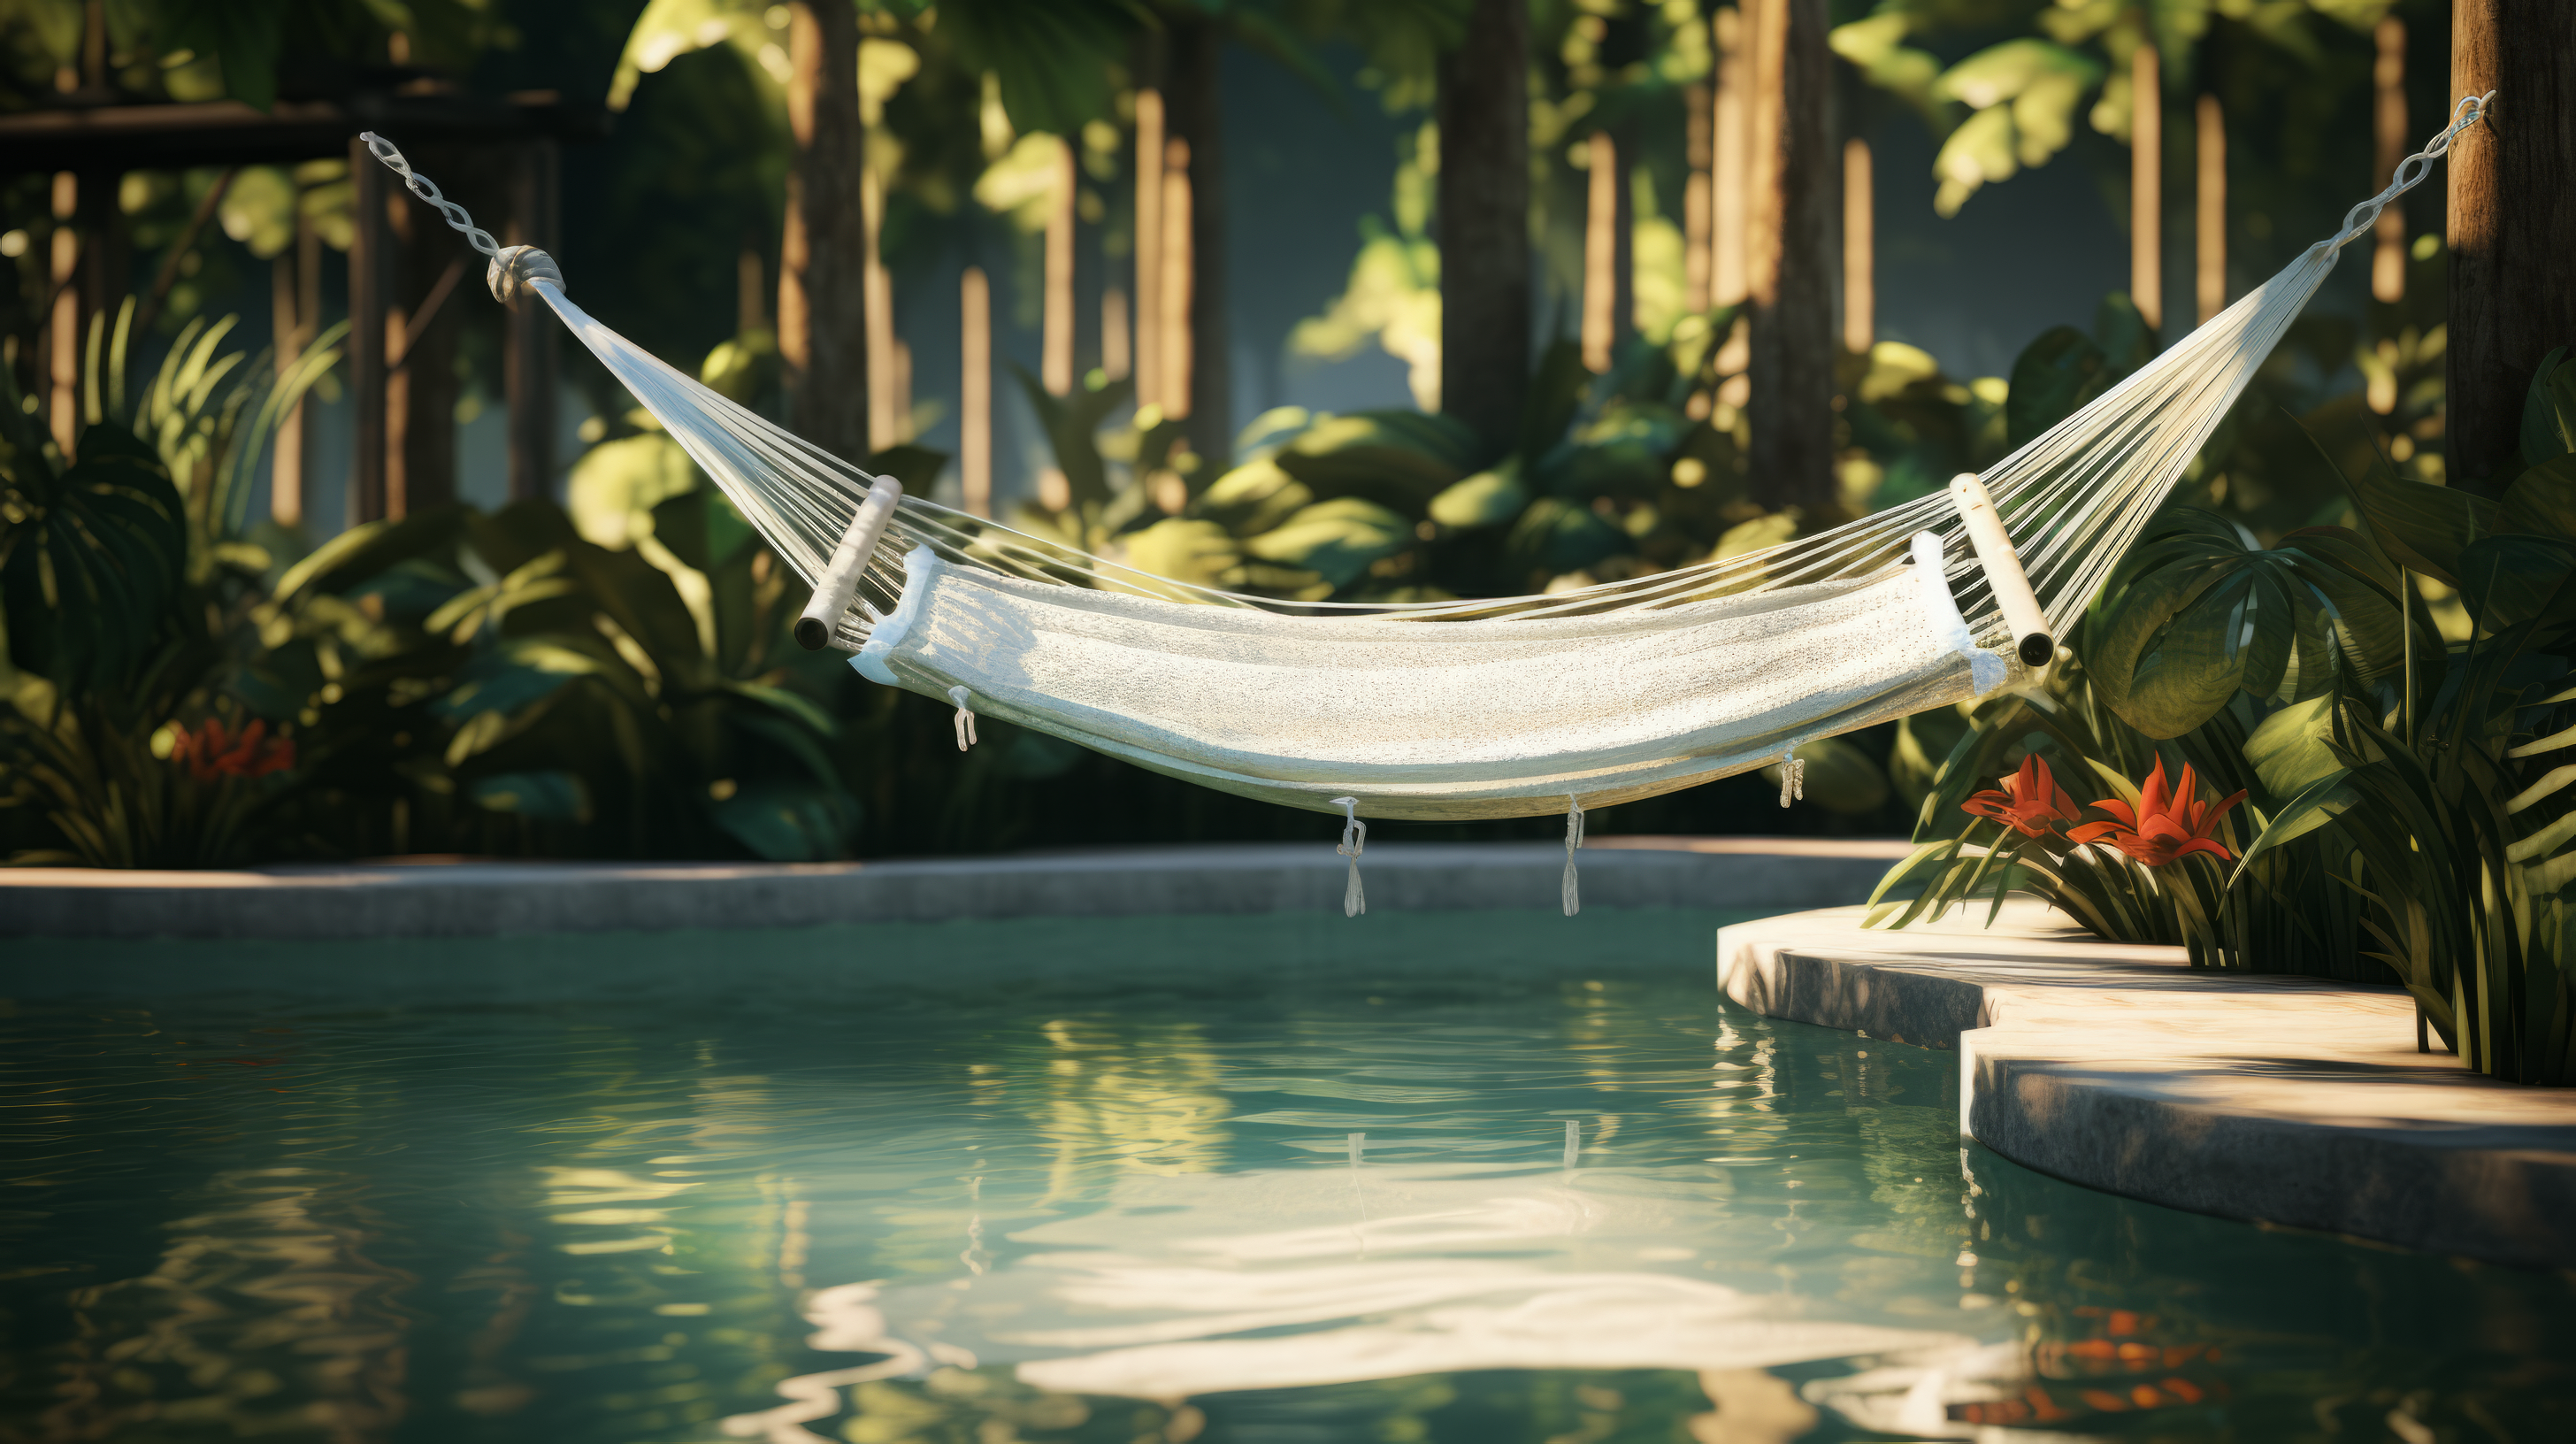 HD wallpaper of a tranquil hammock by the poolside with lush greenery, perfect for desktop background, created with AI art.